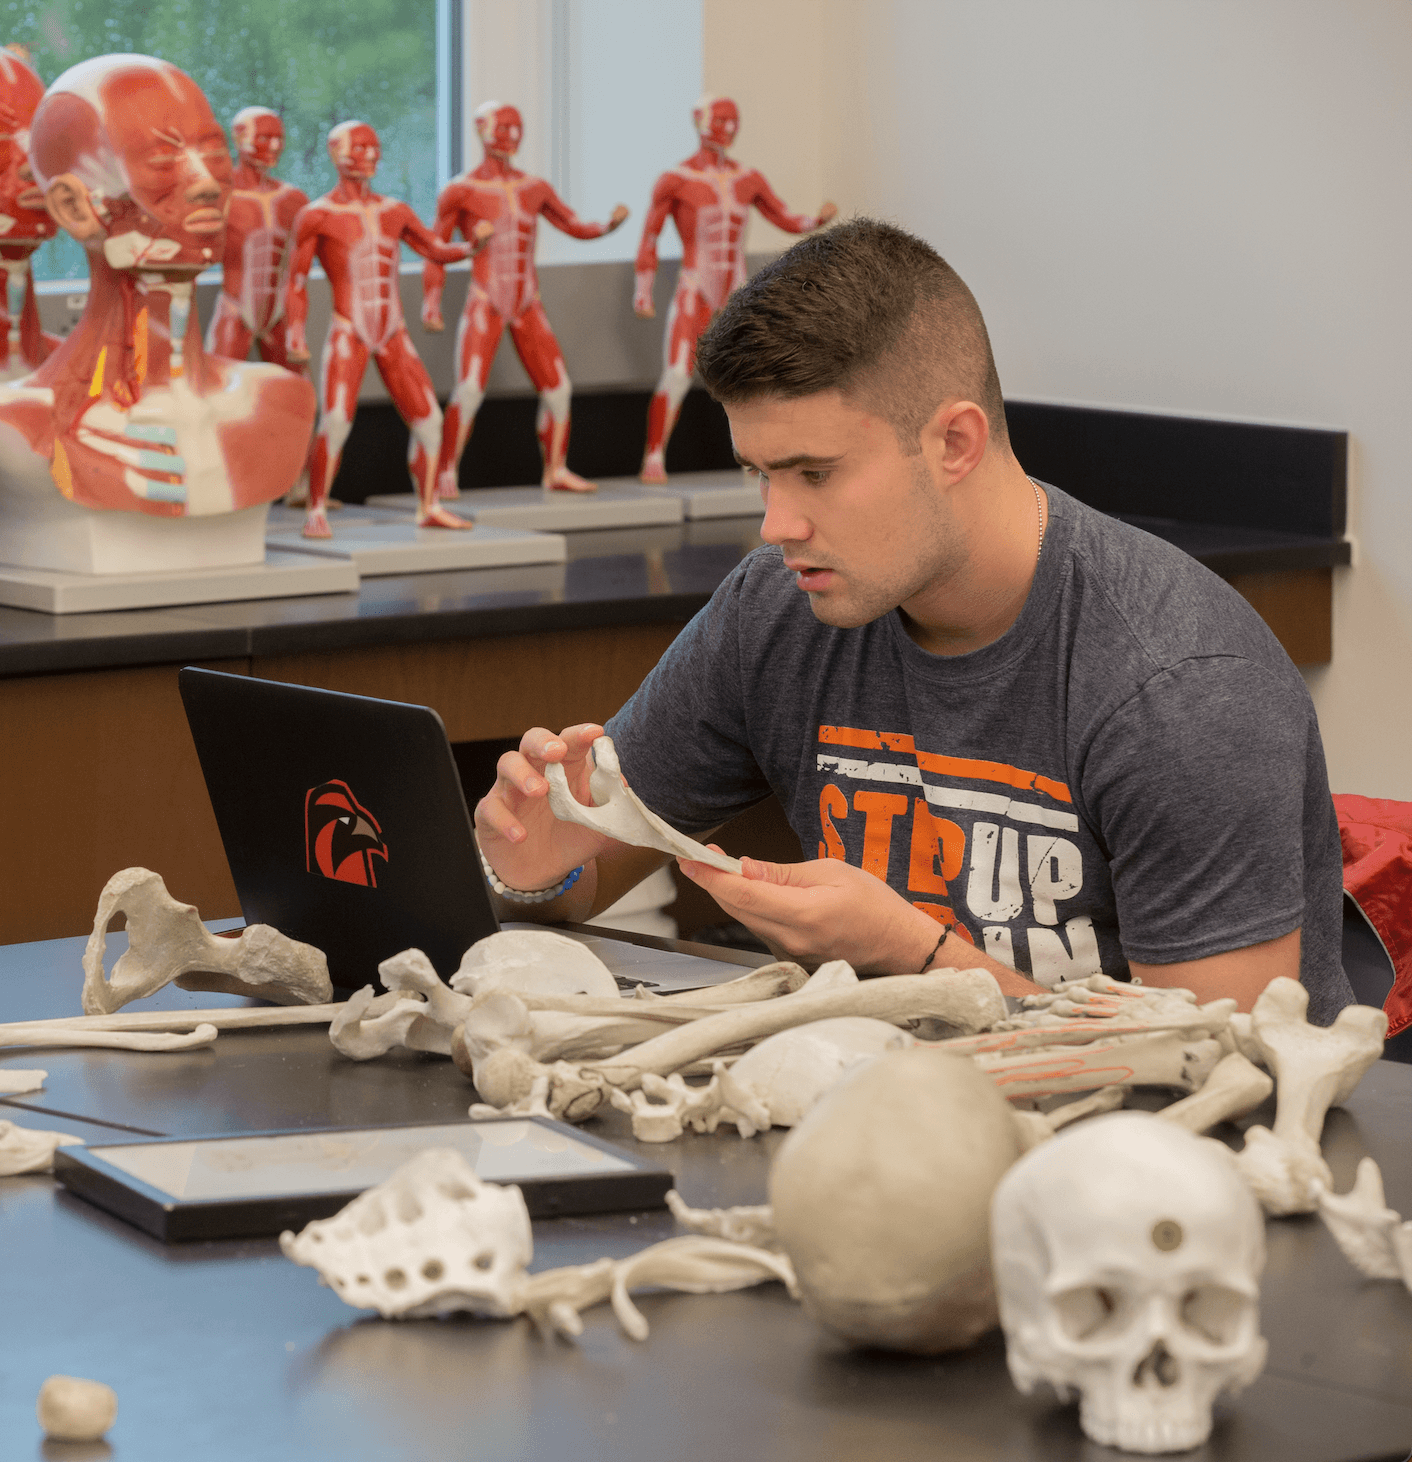 A student reviews skeleton bones for anatomy class. BGSU has a variety of pre-professional experiences on campus for pre-med students.